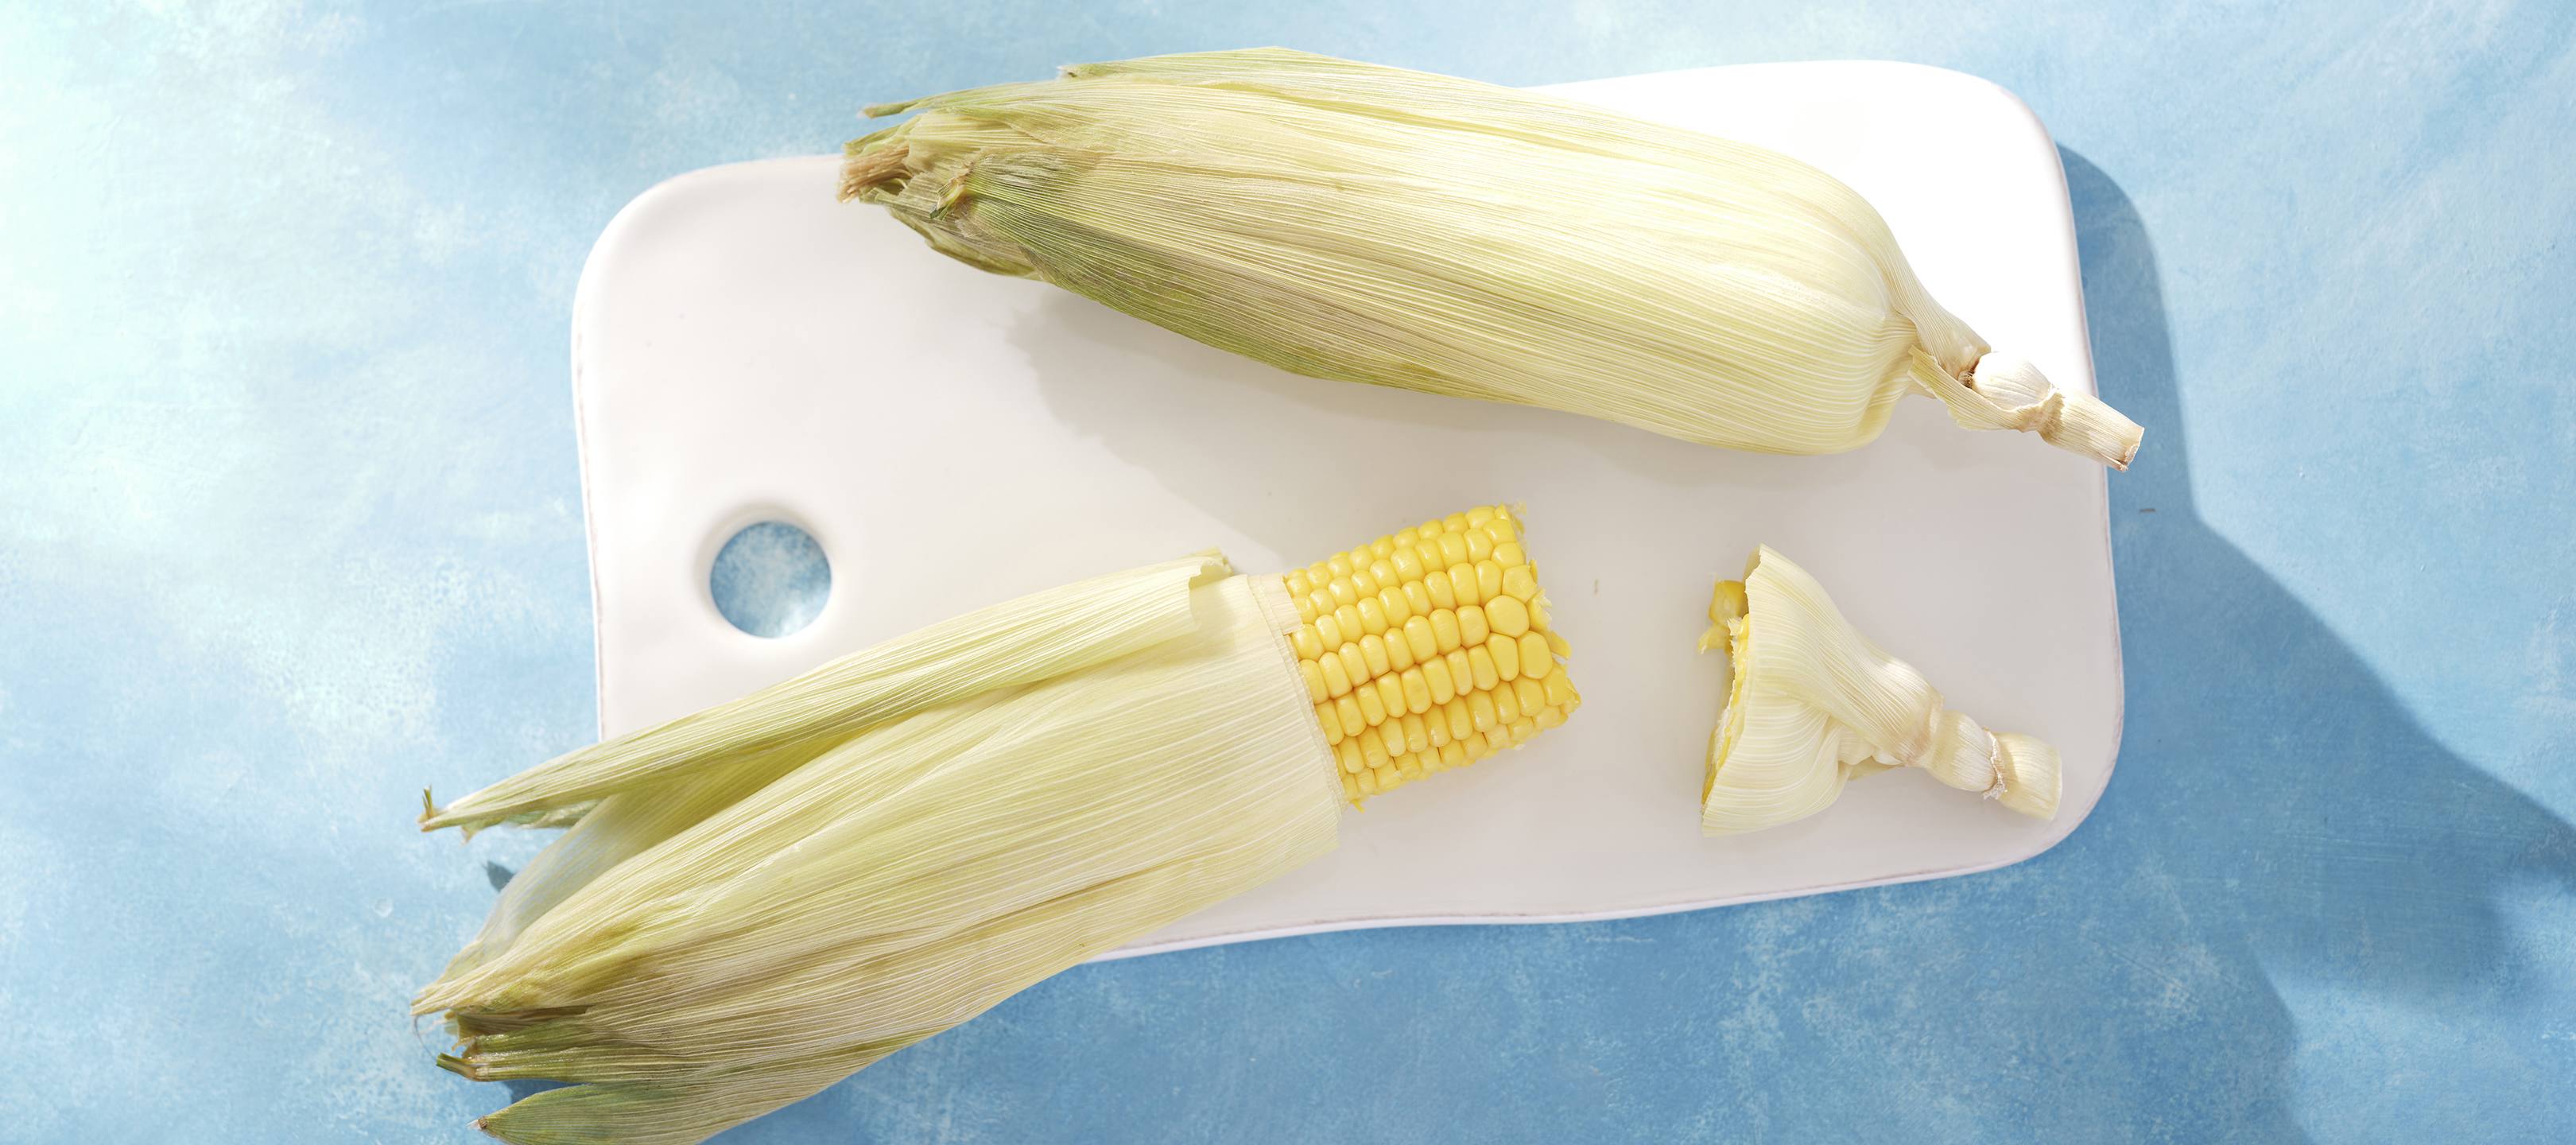 The Foolproof Way To Shuck Corn In Seconds 